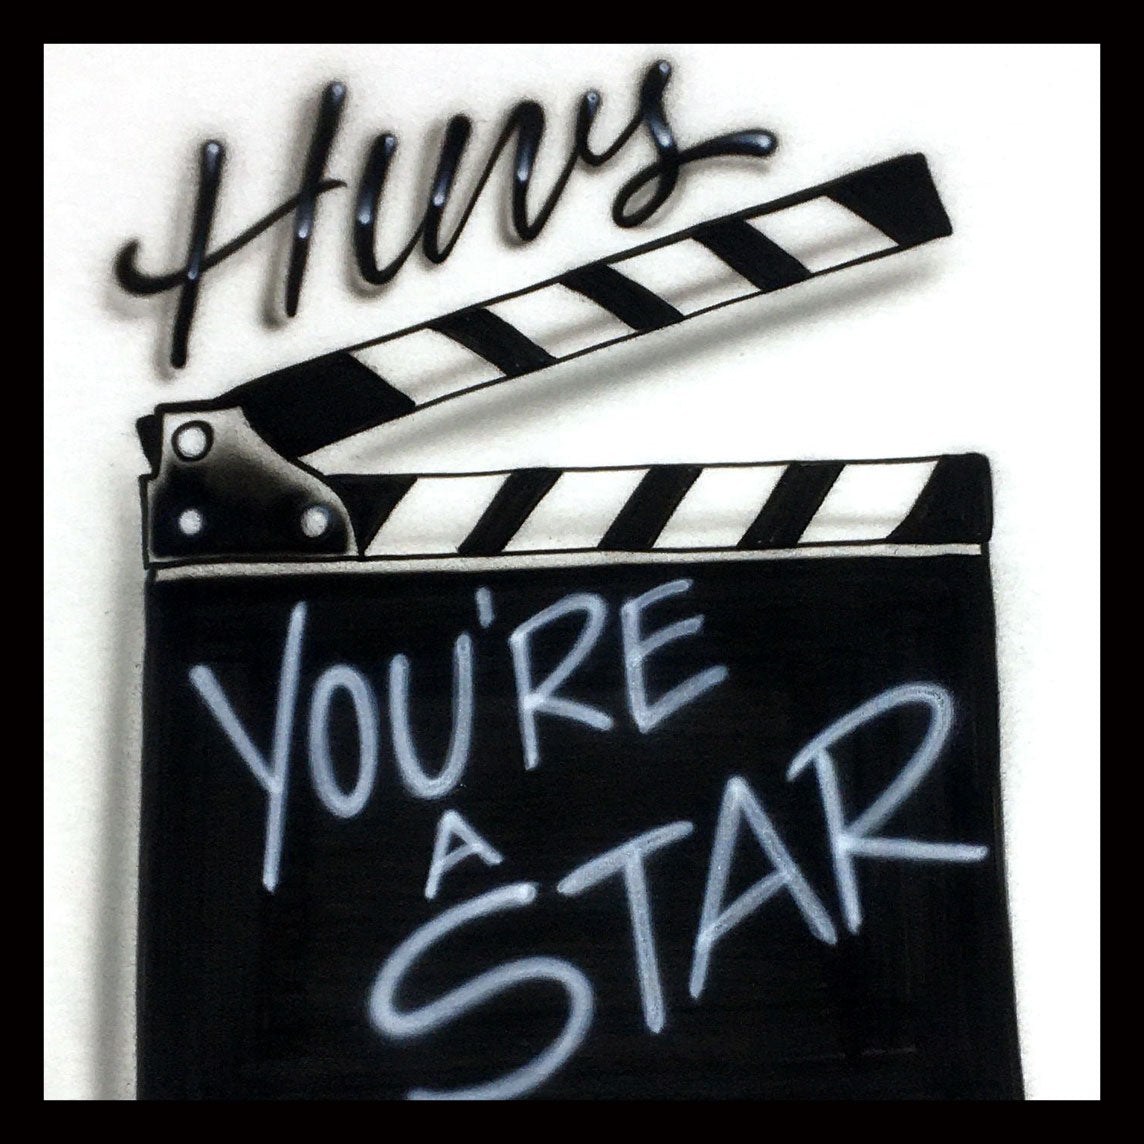 Airbrush T-Shirt * You're a Star * Clapperboard * Personalized * Custom * Gift